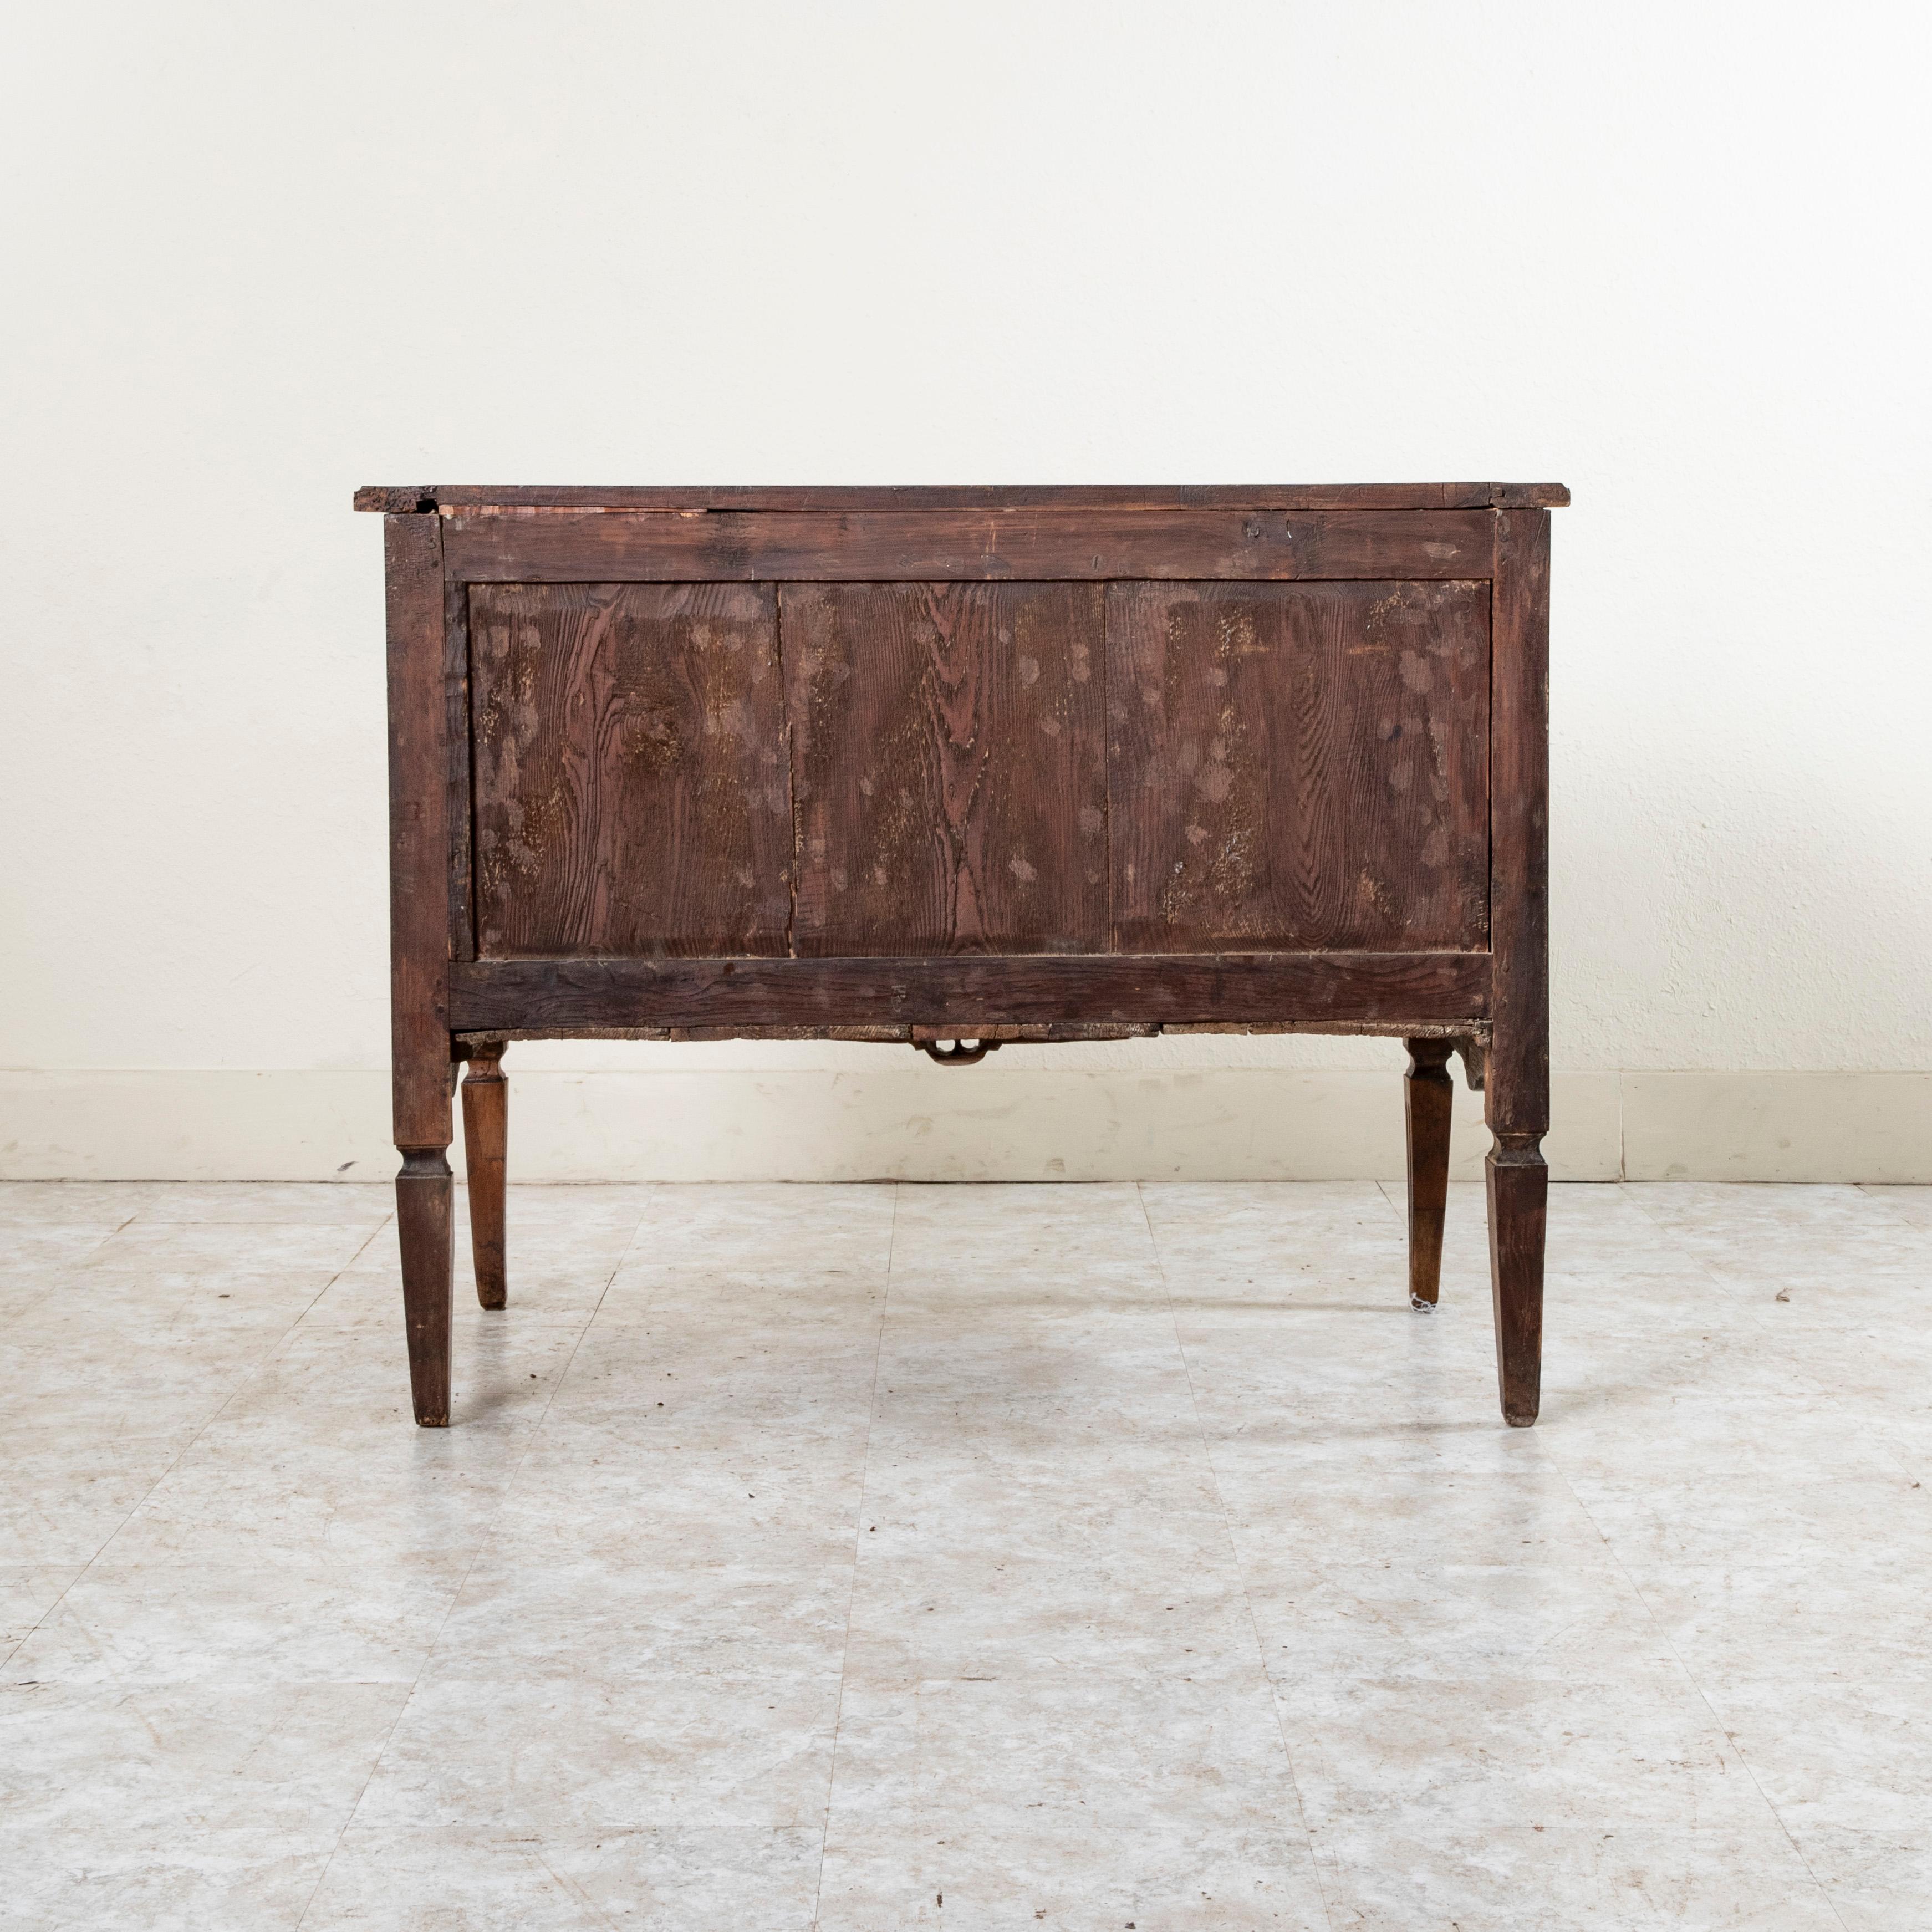 Bronze Late 18th Century French Louis XVI Period Walnut Commode or Chest of Drawers